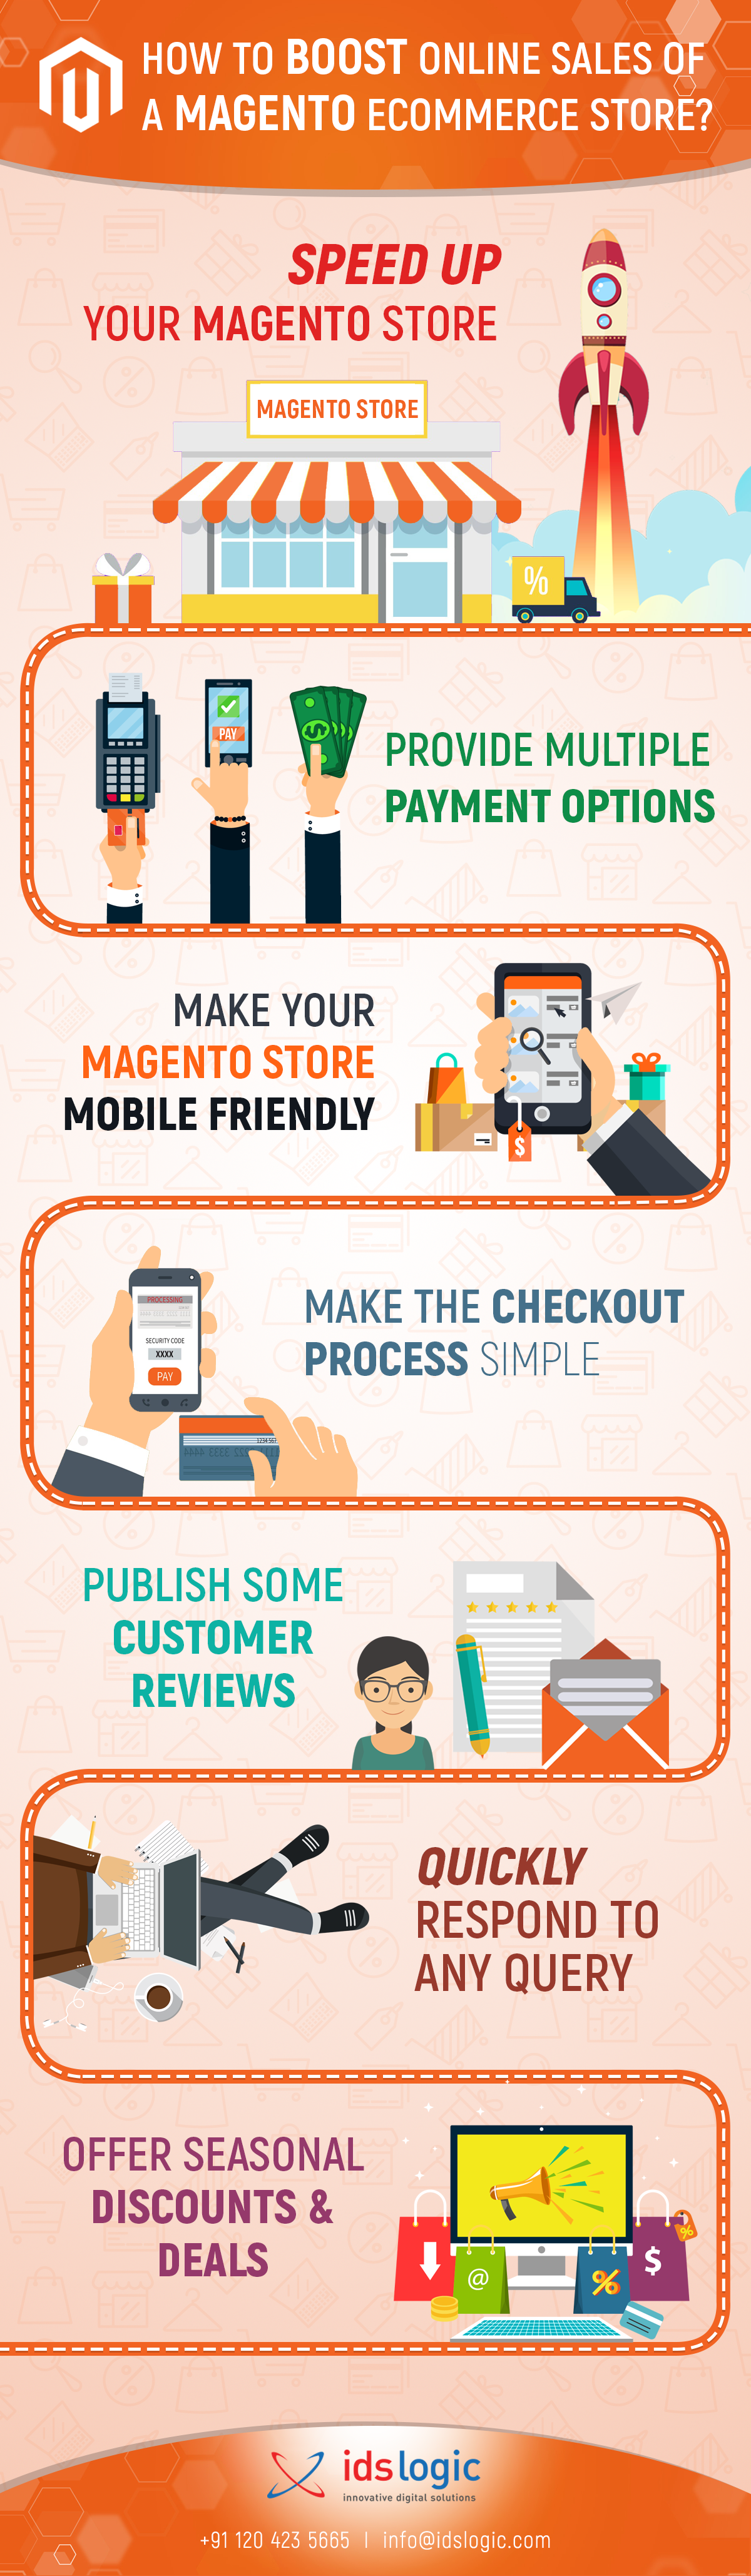 How-to-boost-online-sales-of-Magento-eCommerce-Store